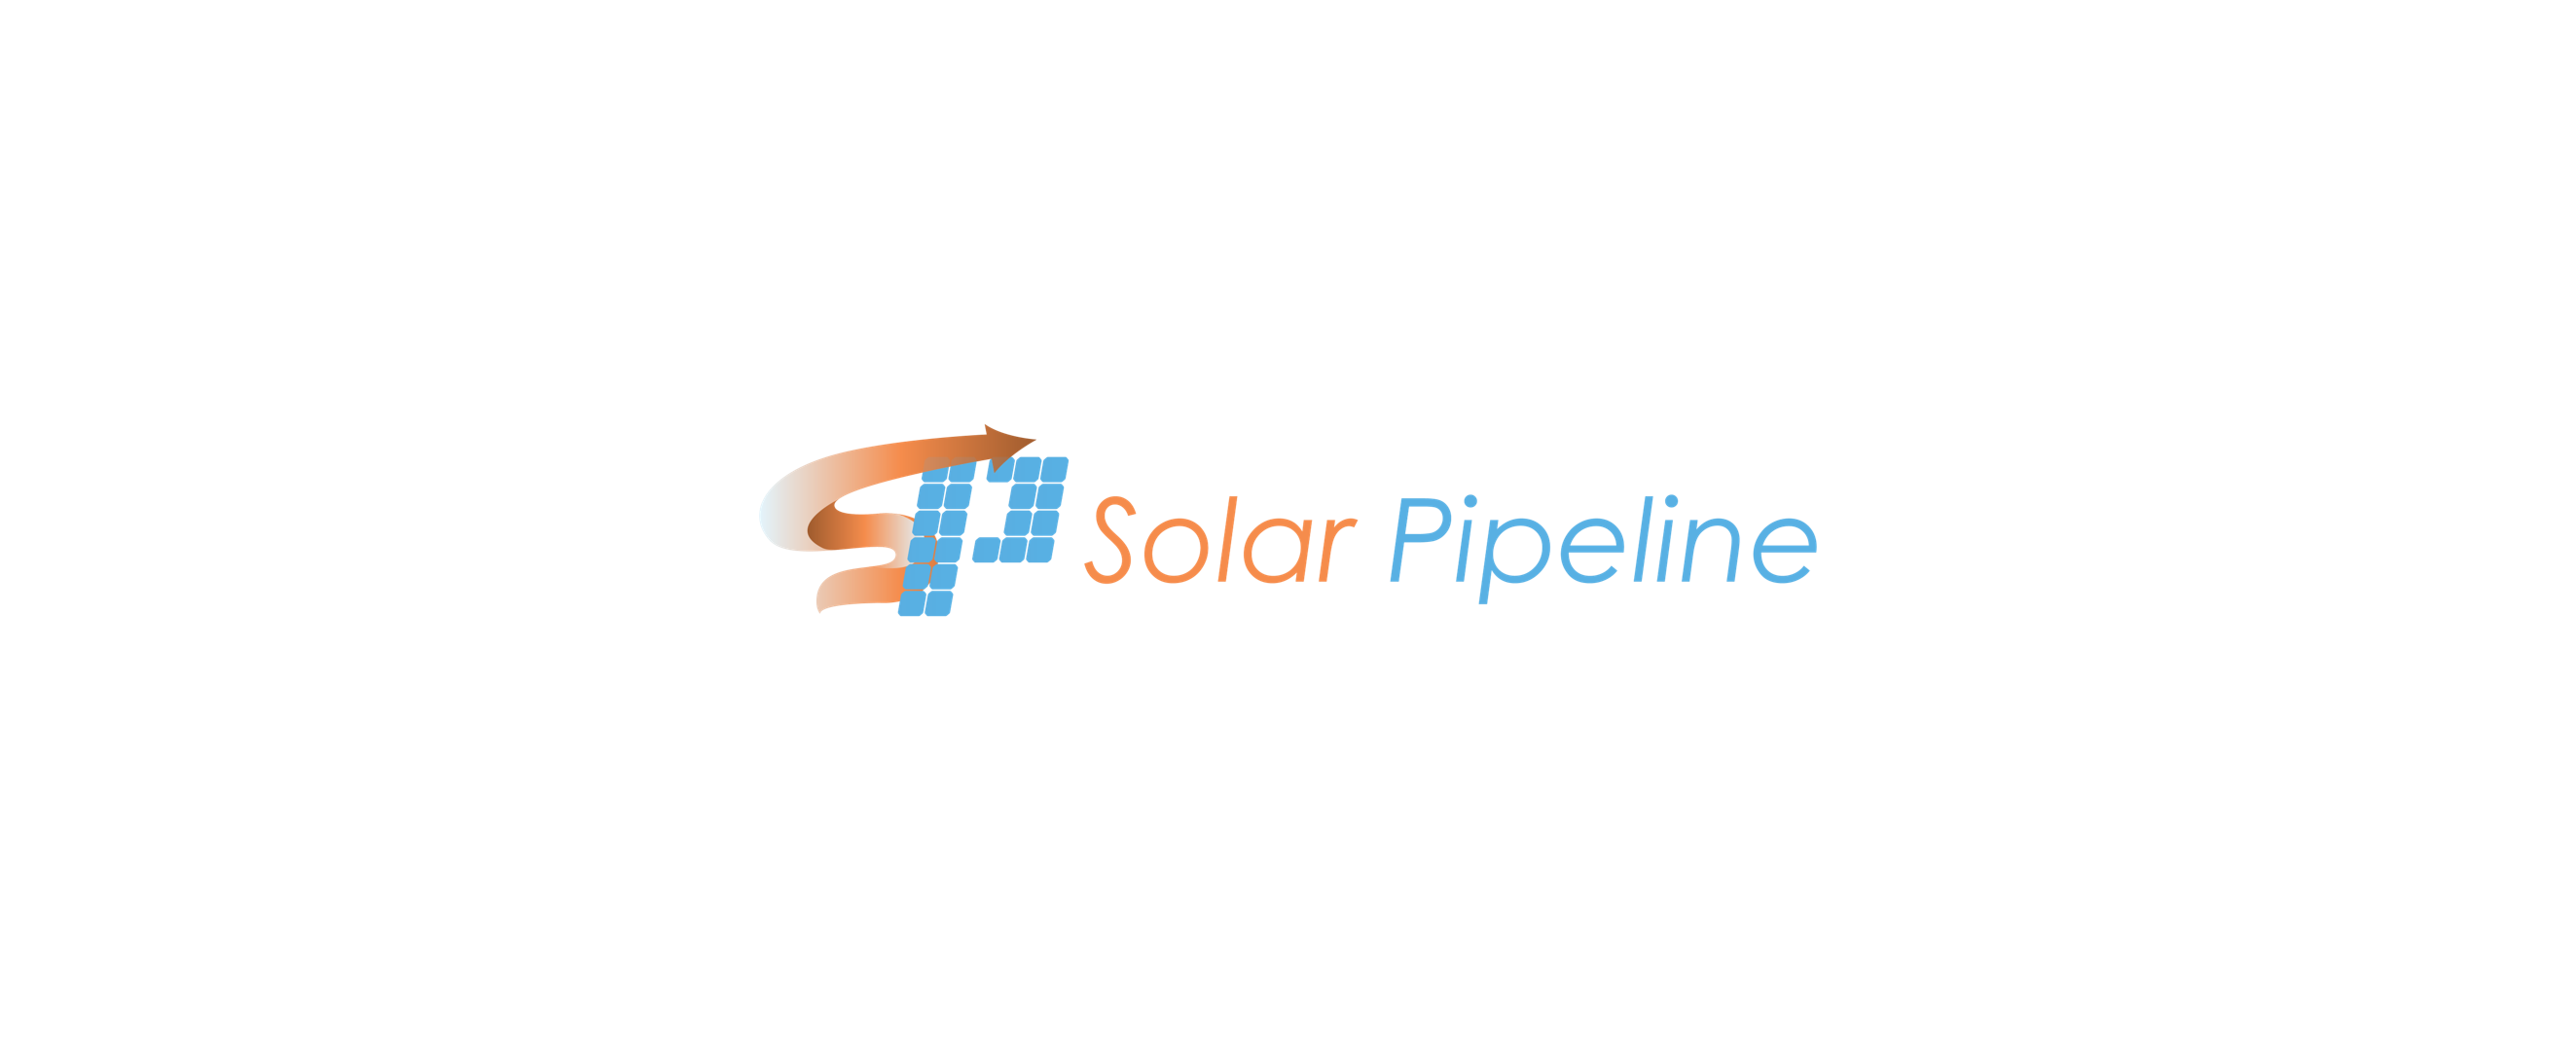 The best Solar CRM, Solar Project Management Platform, and Solar Coaching platform. The Solar Pipeline is an All-in-One Solution that allows you to generate, follow up and manage solar leads. Manage your Solar projects and your Sales Team.